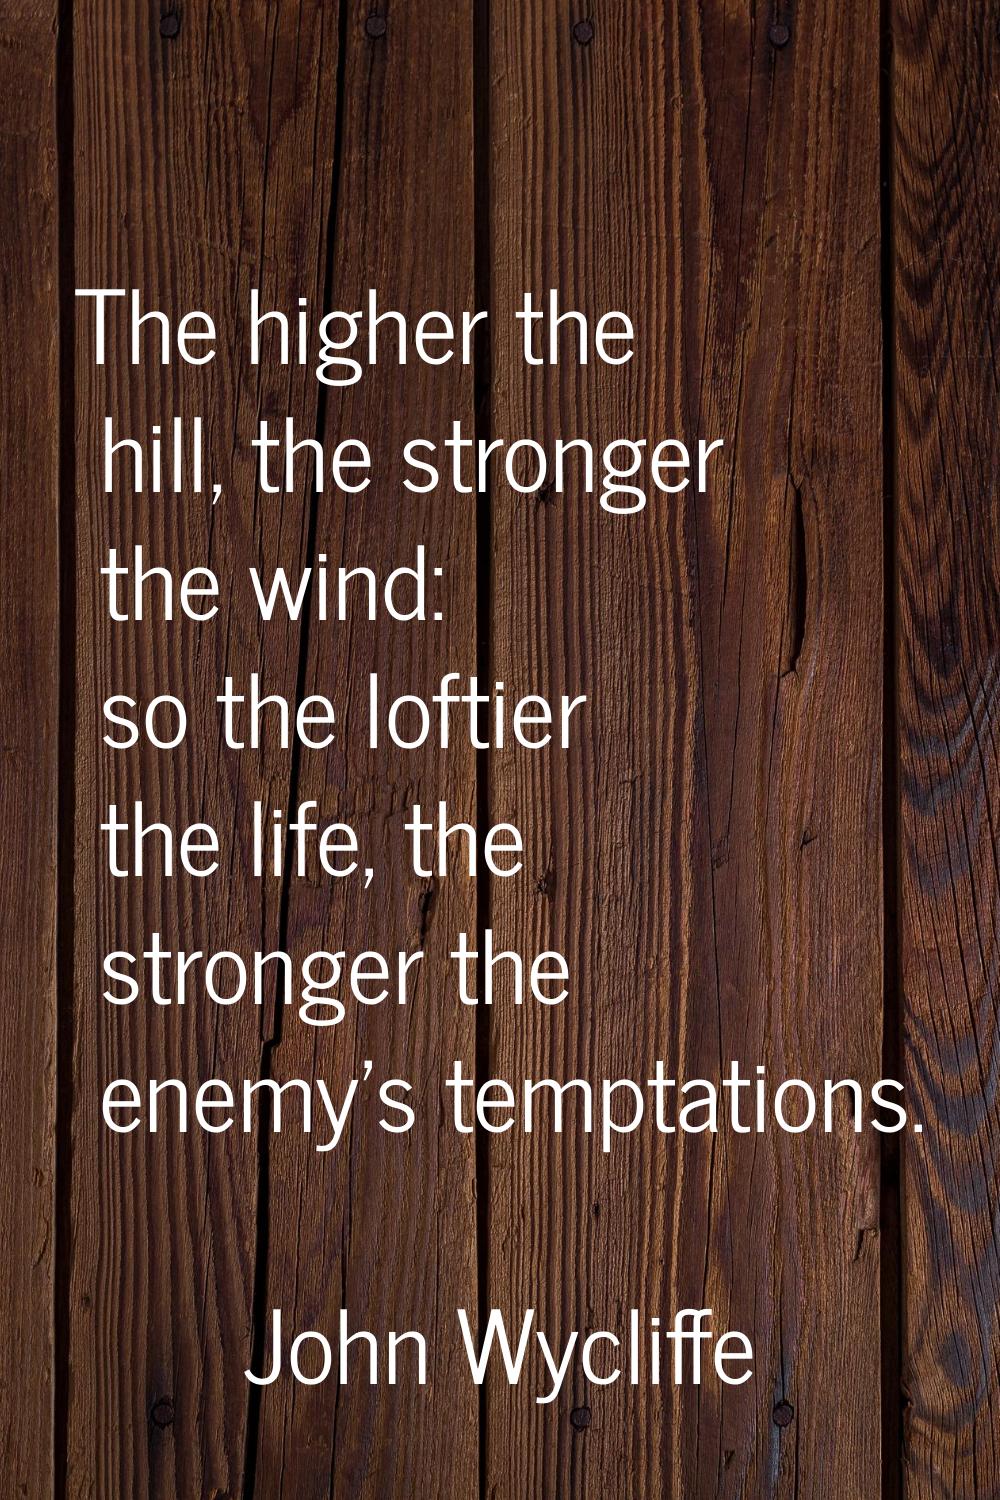 The higher the hill, the stronger the wind: so the loftier the life, the stronger the enemy's tempt